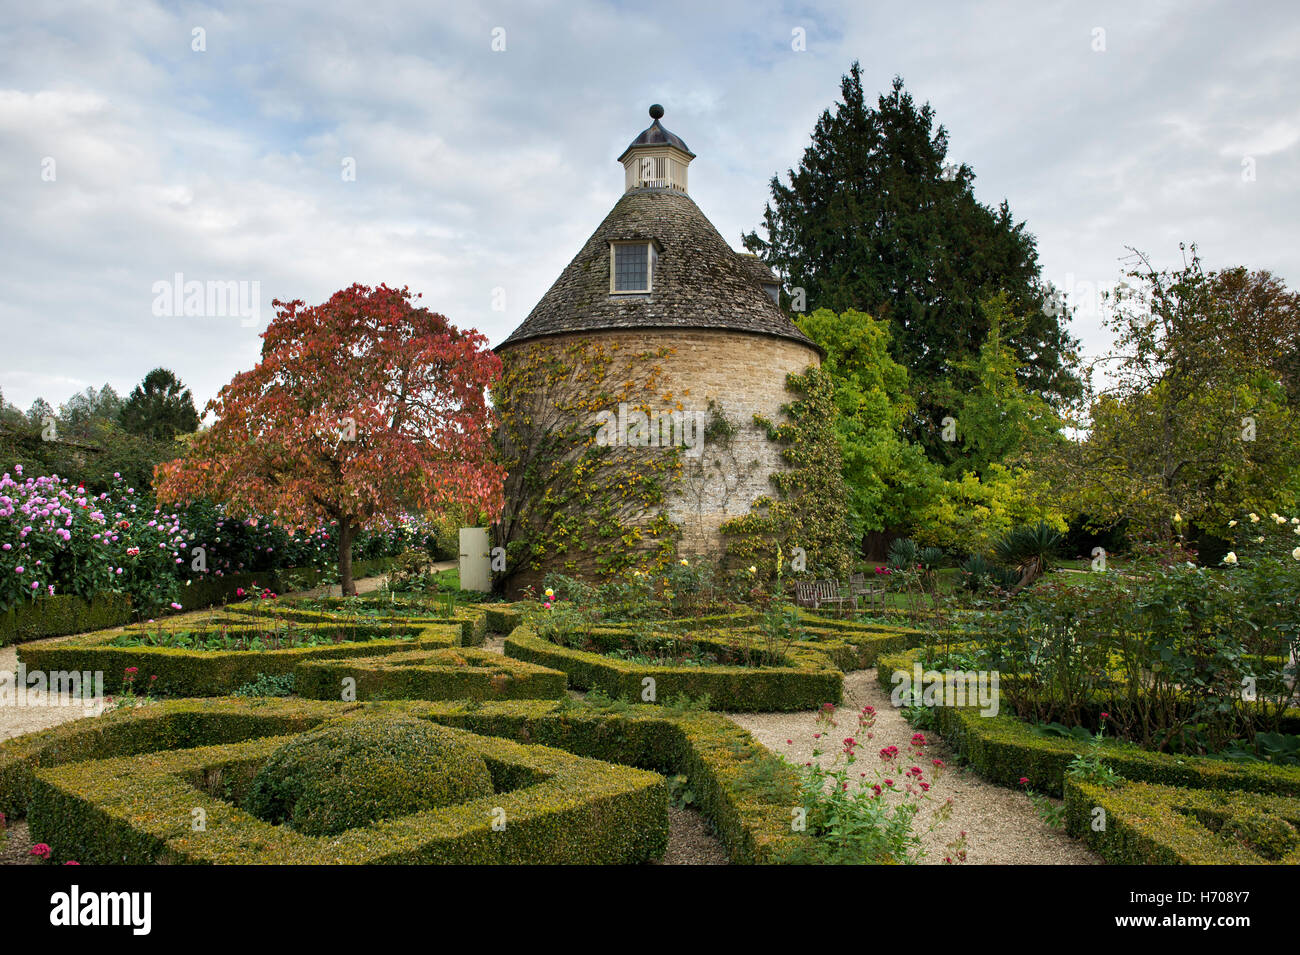 Pigeon house and garden in autumn at Rousham House and Garden. Oxfordshire, England Stock Photo